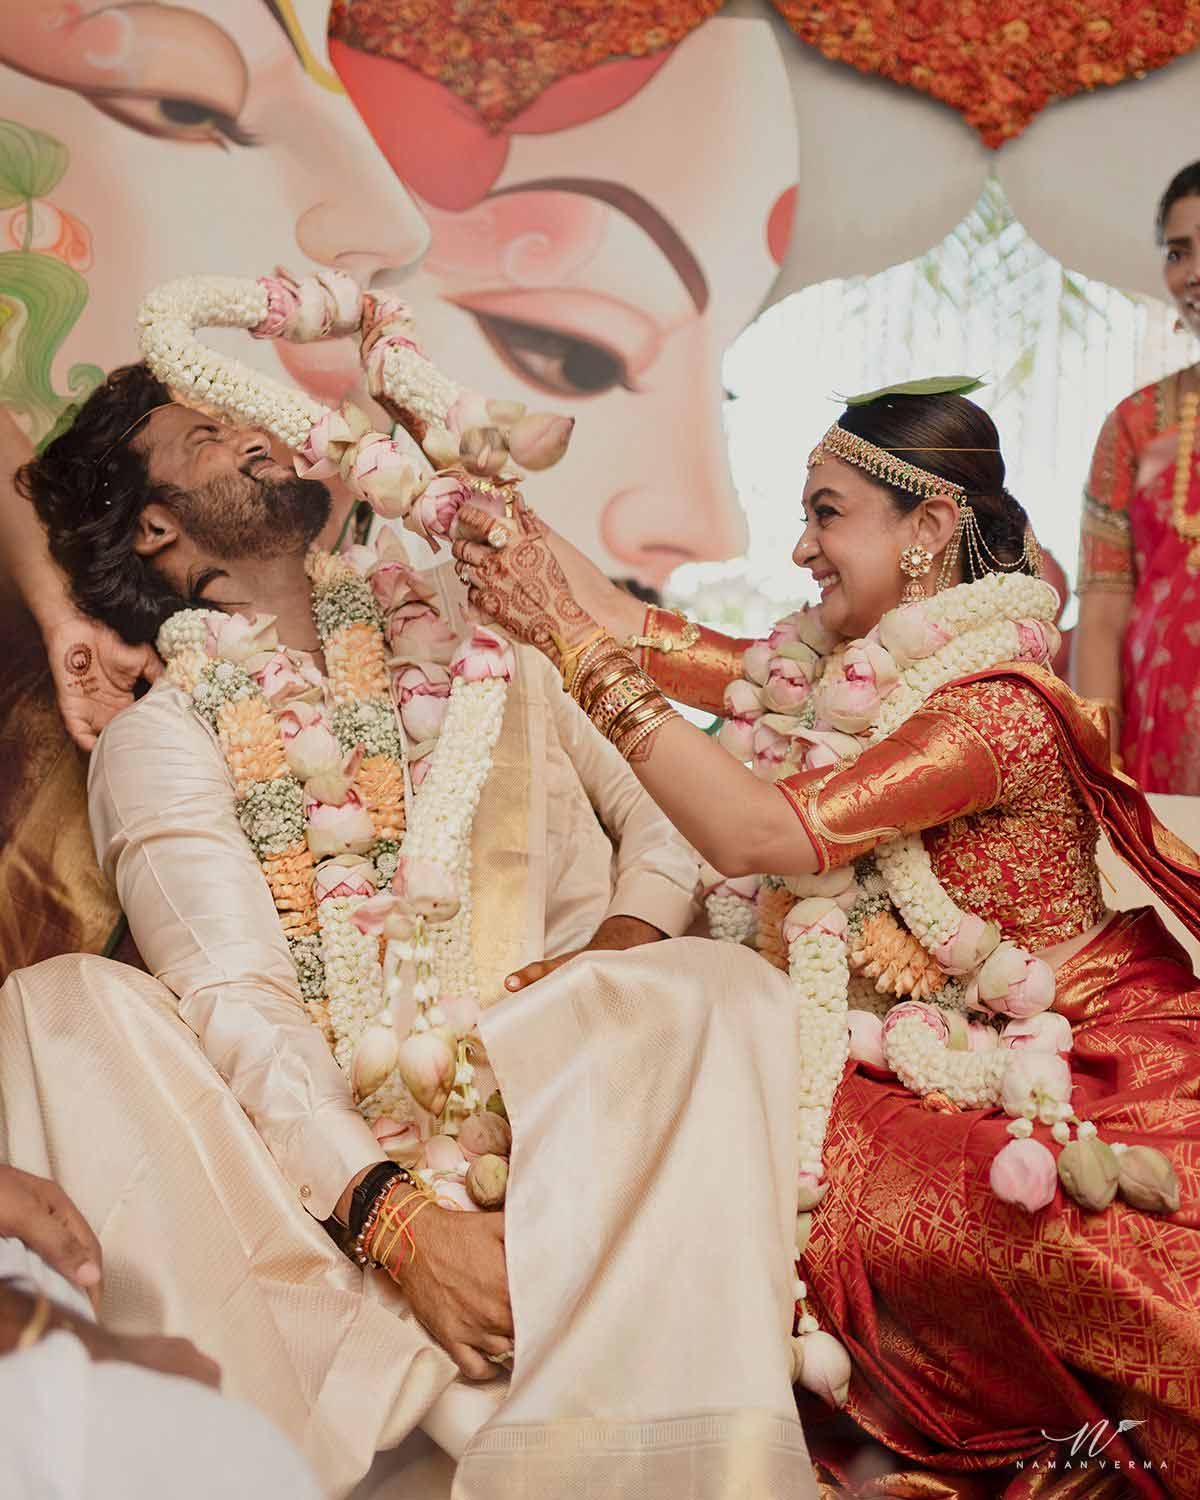 Arjuns daughter Aishwarya marries Umapathy Ramaiah in a star-studded ceremony